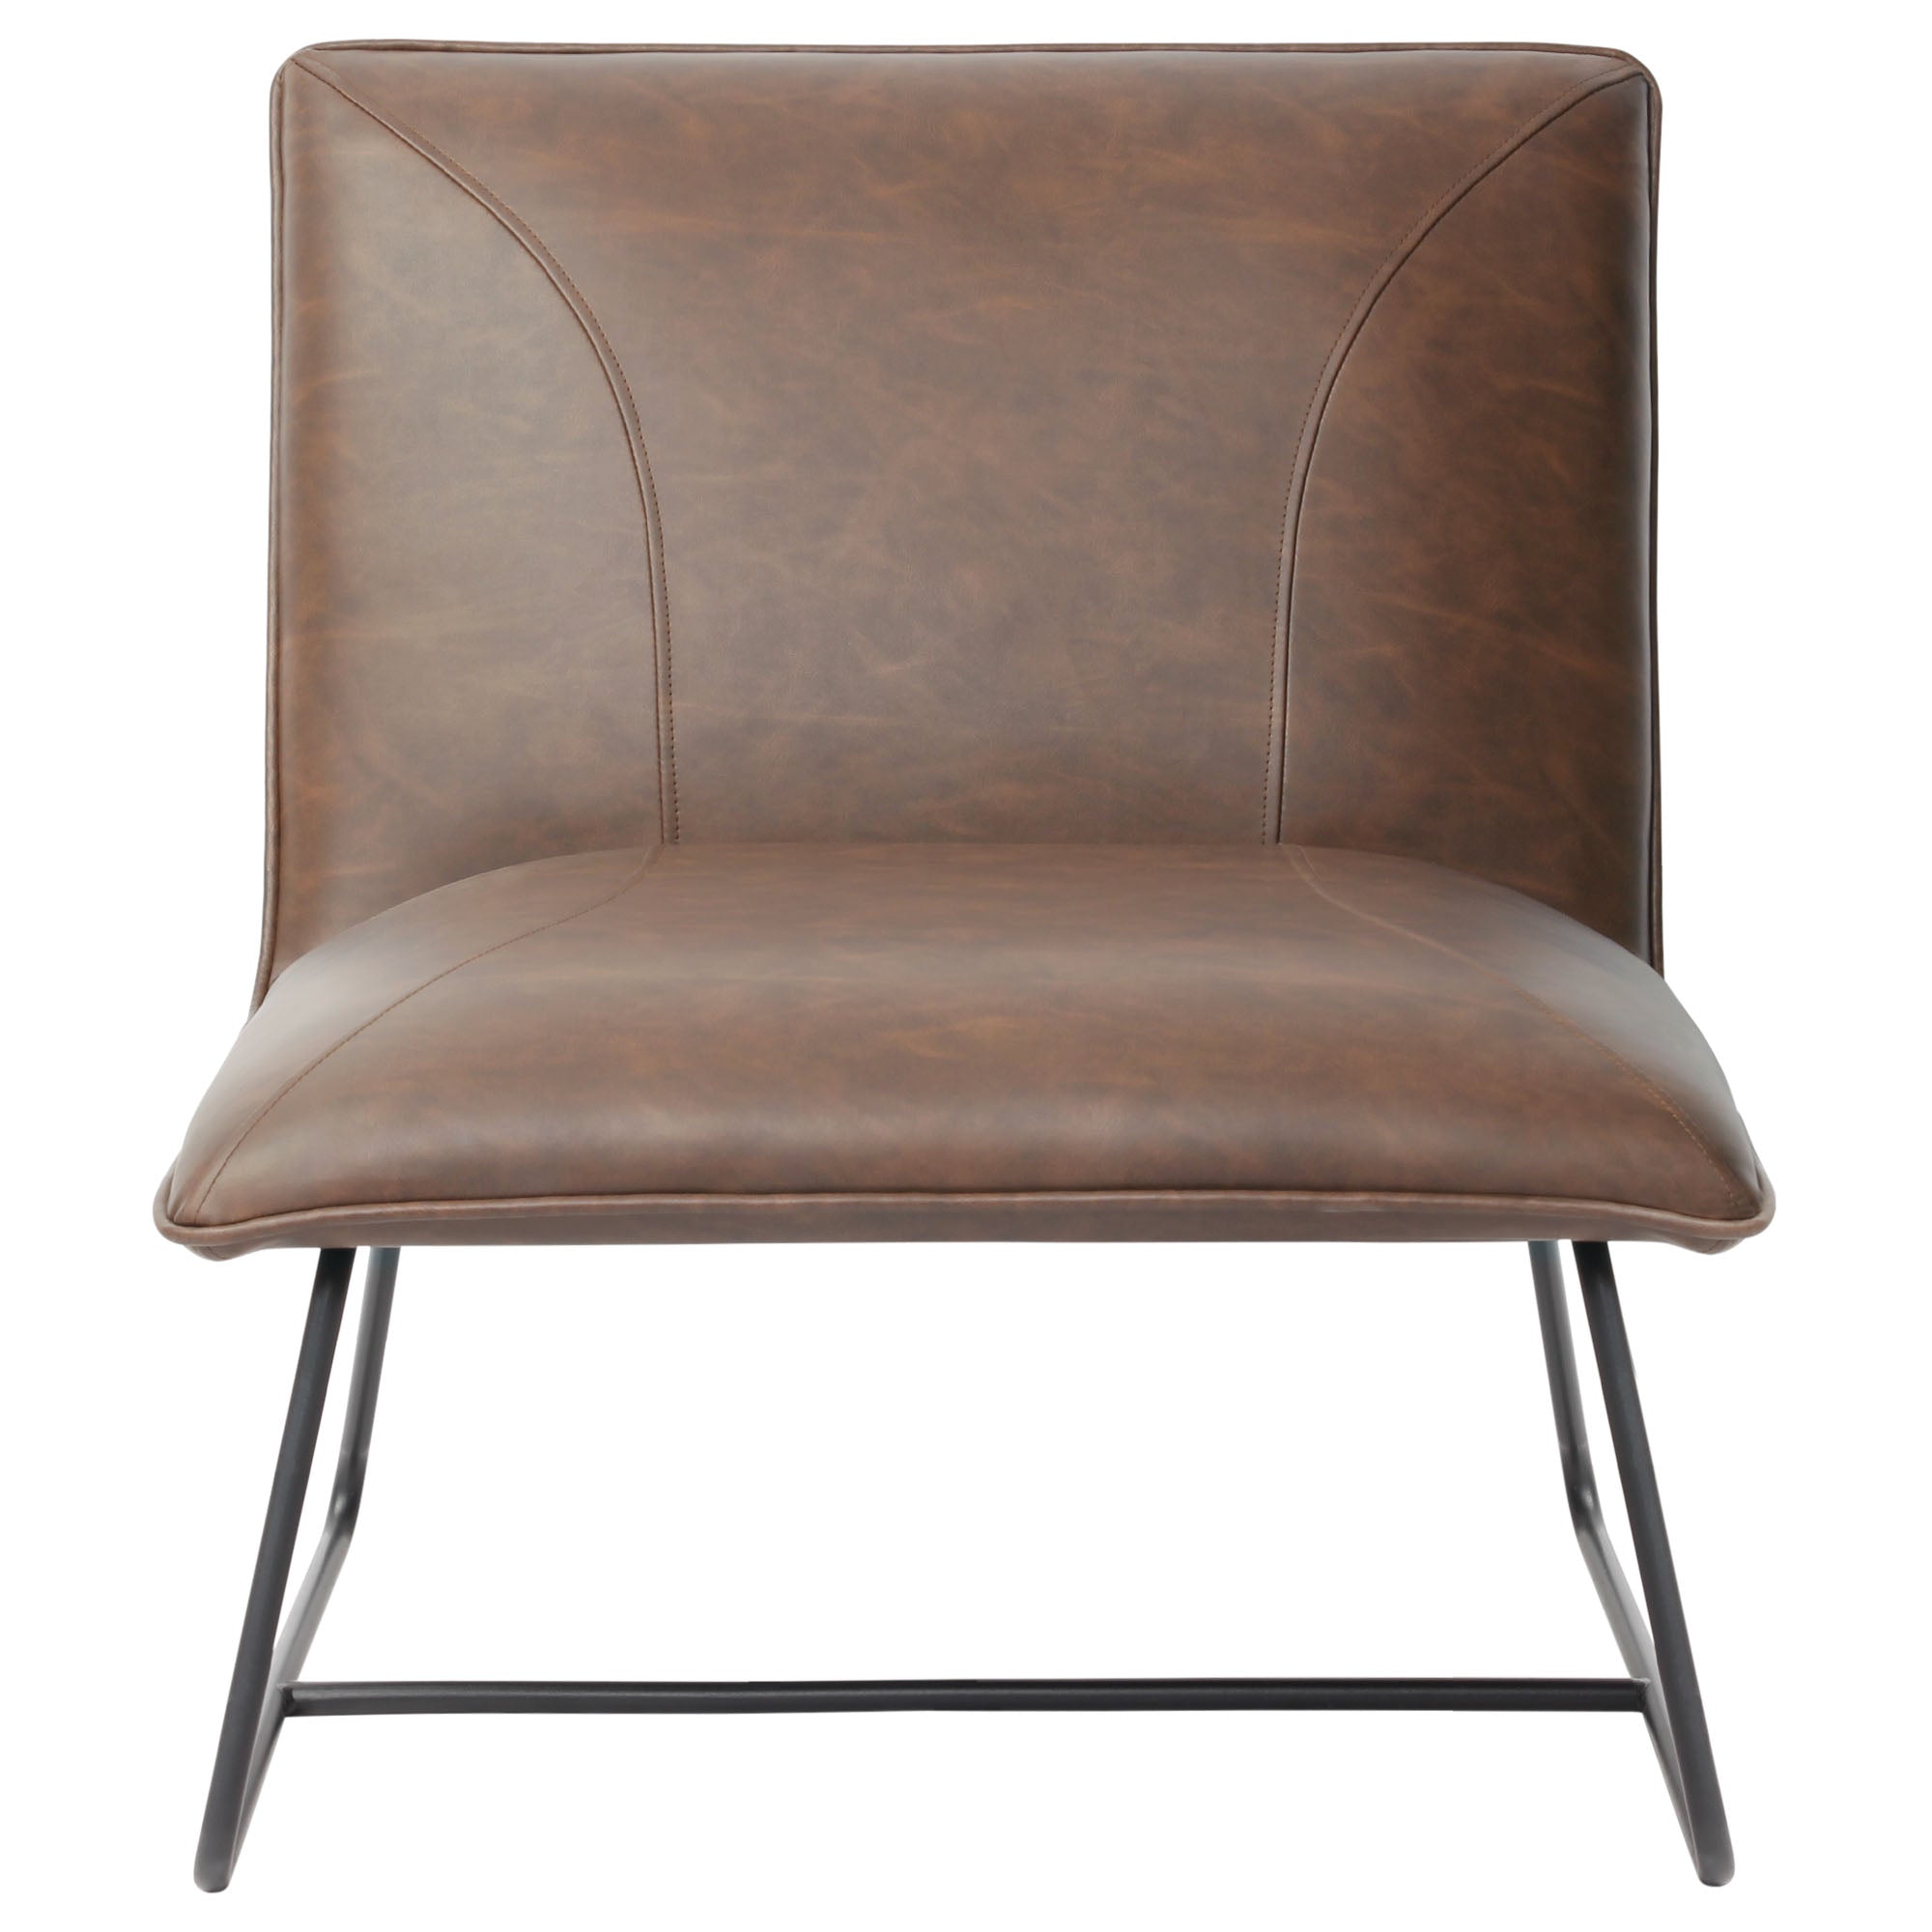 Diamond Sofa Jordan Armless Accent Chair in Chocolate Leatherette with Chrome Metal Base